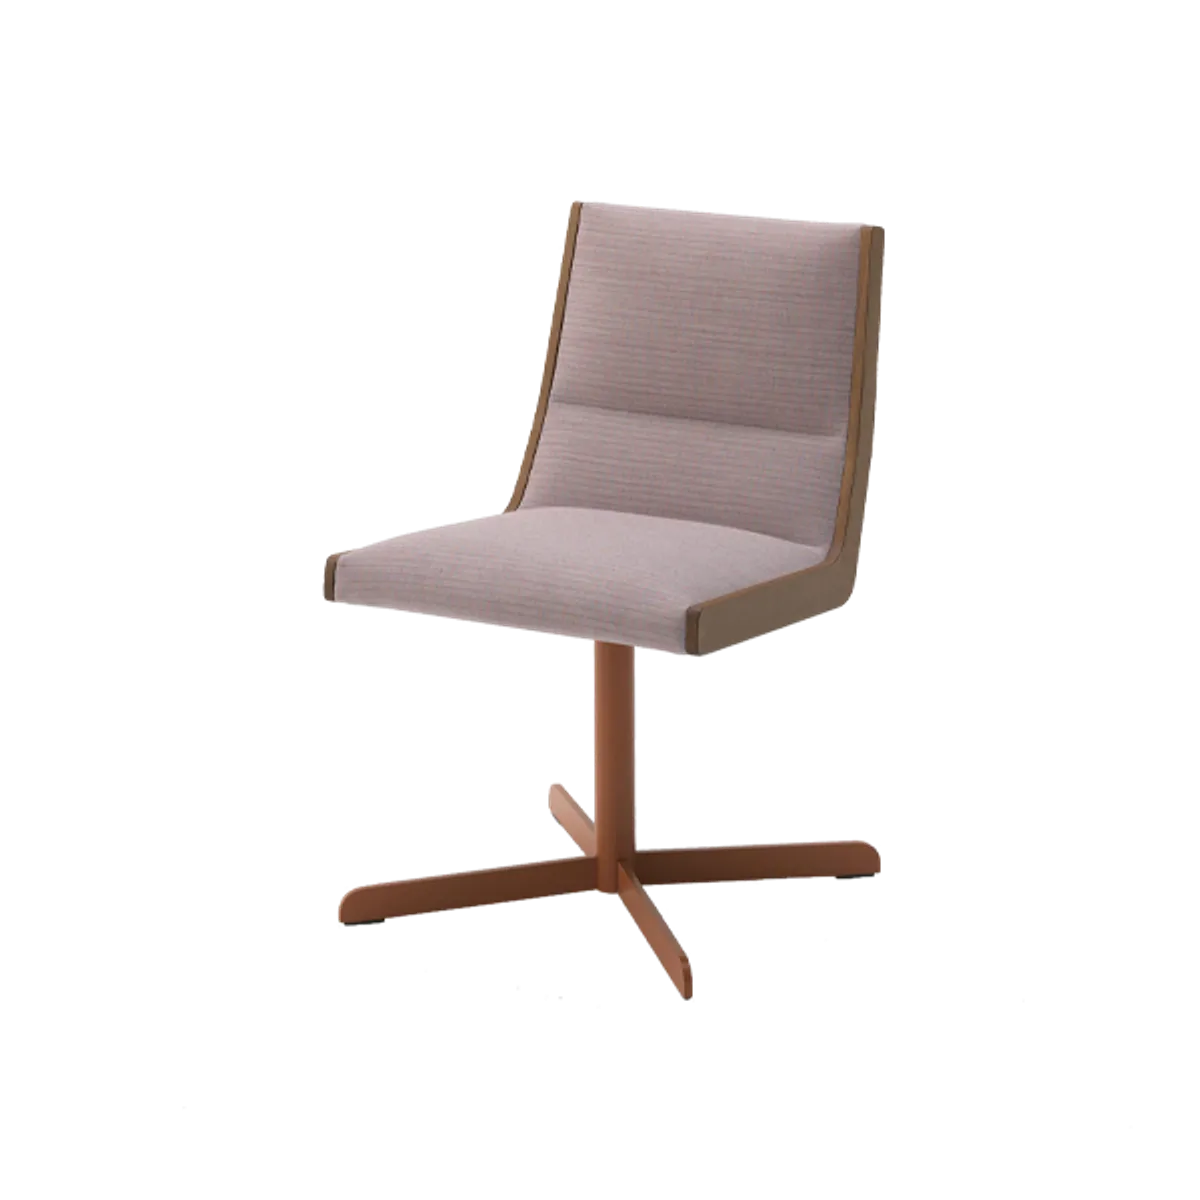 Stilo Swivel Chair Retro Furniture Inside Out Contracts